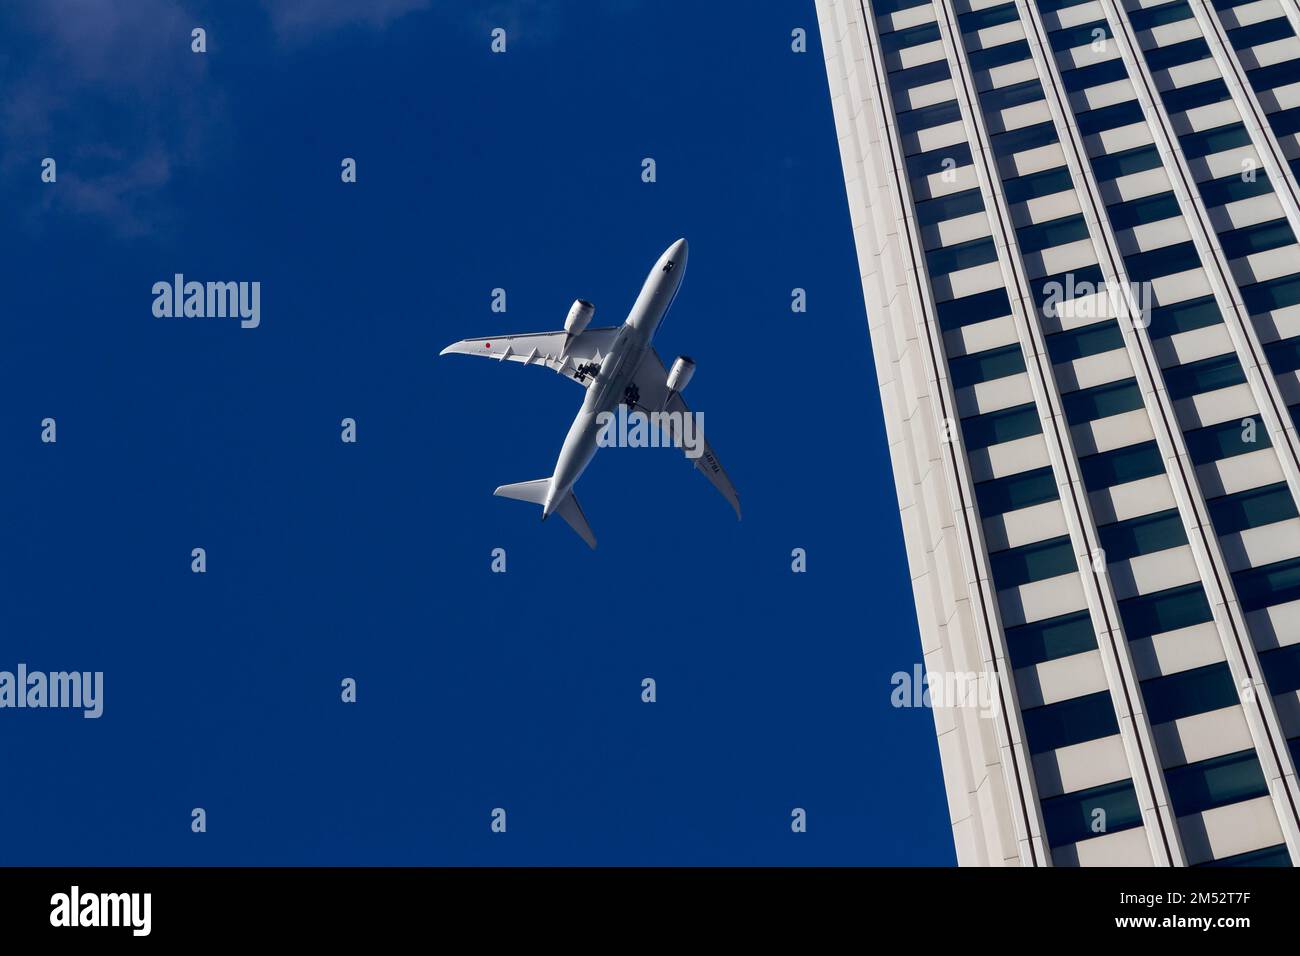 The underside of an All Nippon Airways (ANA) Boeing 787-8 Dreamliner passenger jet flying dramatically low over a building in Tokyo, Japan. Stock Photo